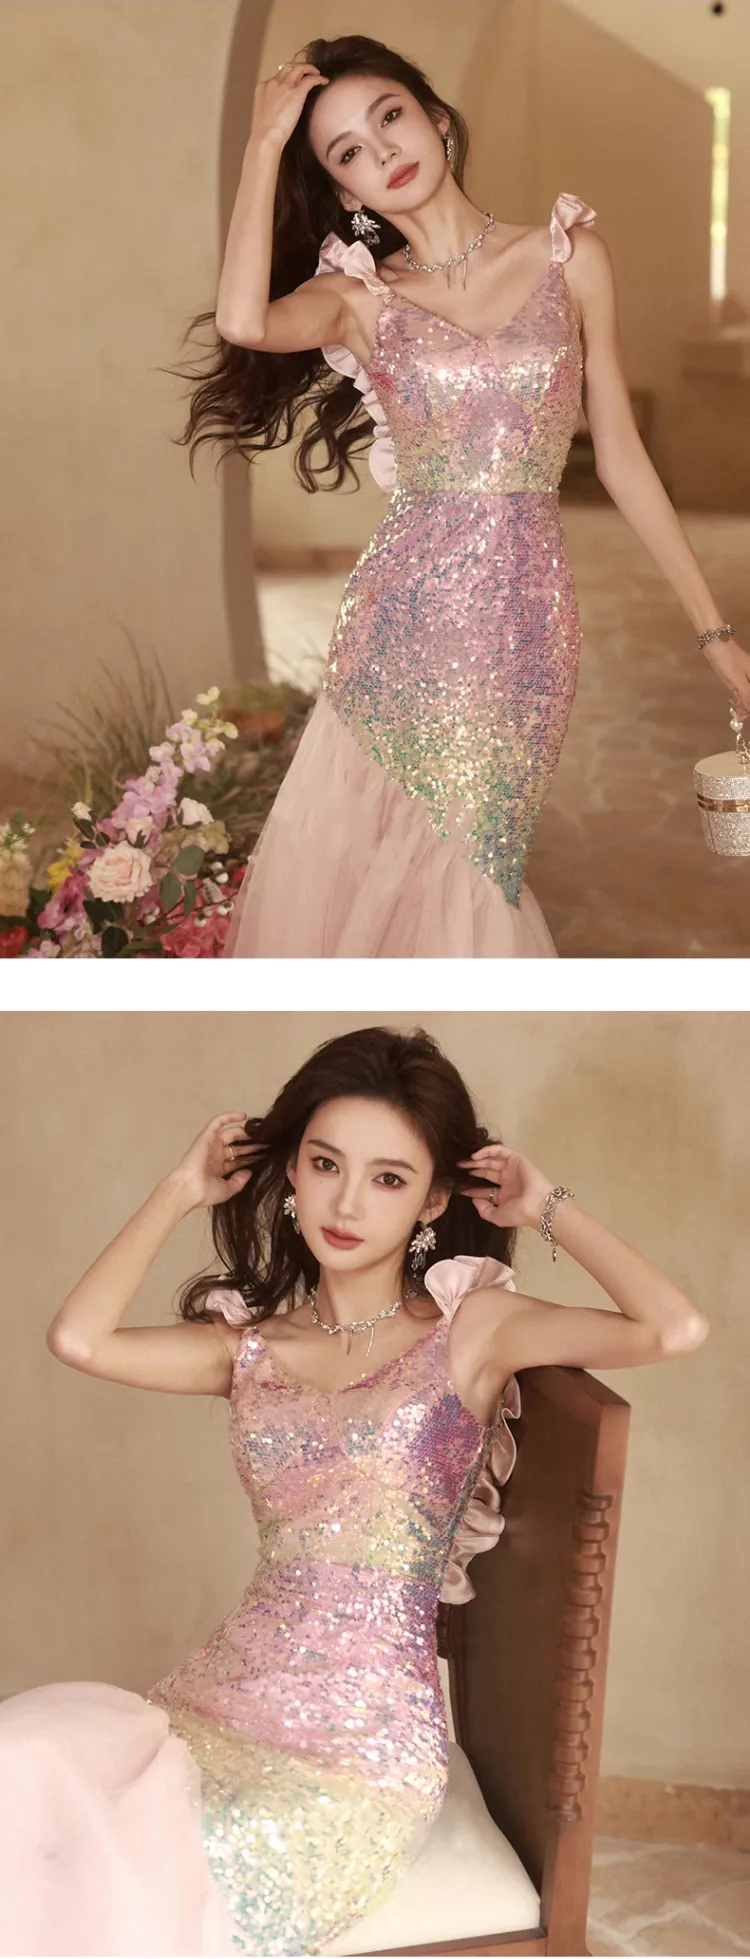 Luxury-Pink-Sequins-Fishtail-Celebrity-Party-Evening-Slip-Dress-Formal-Gown13